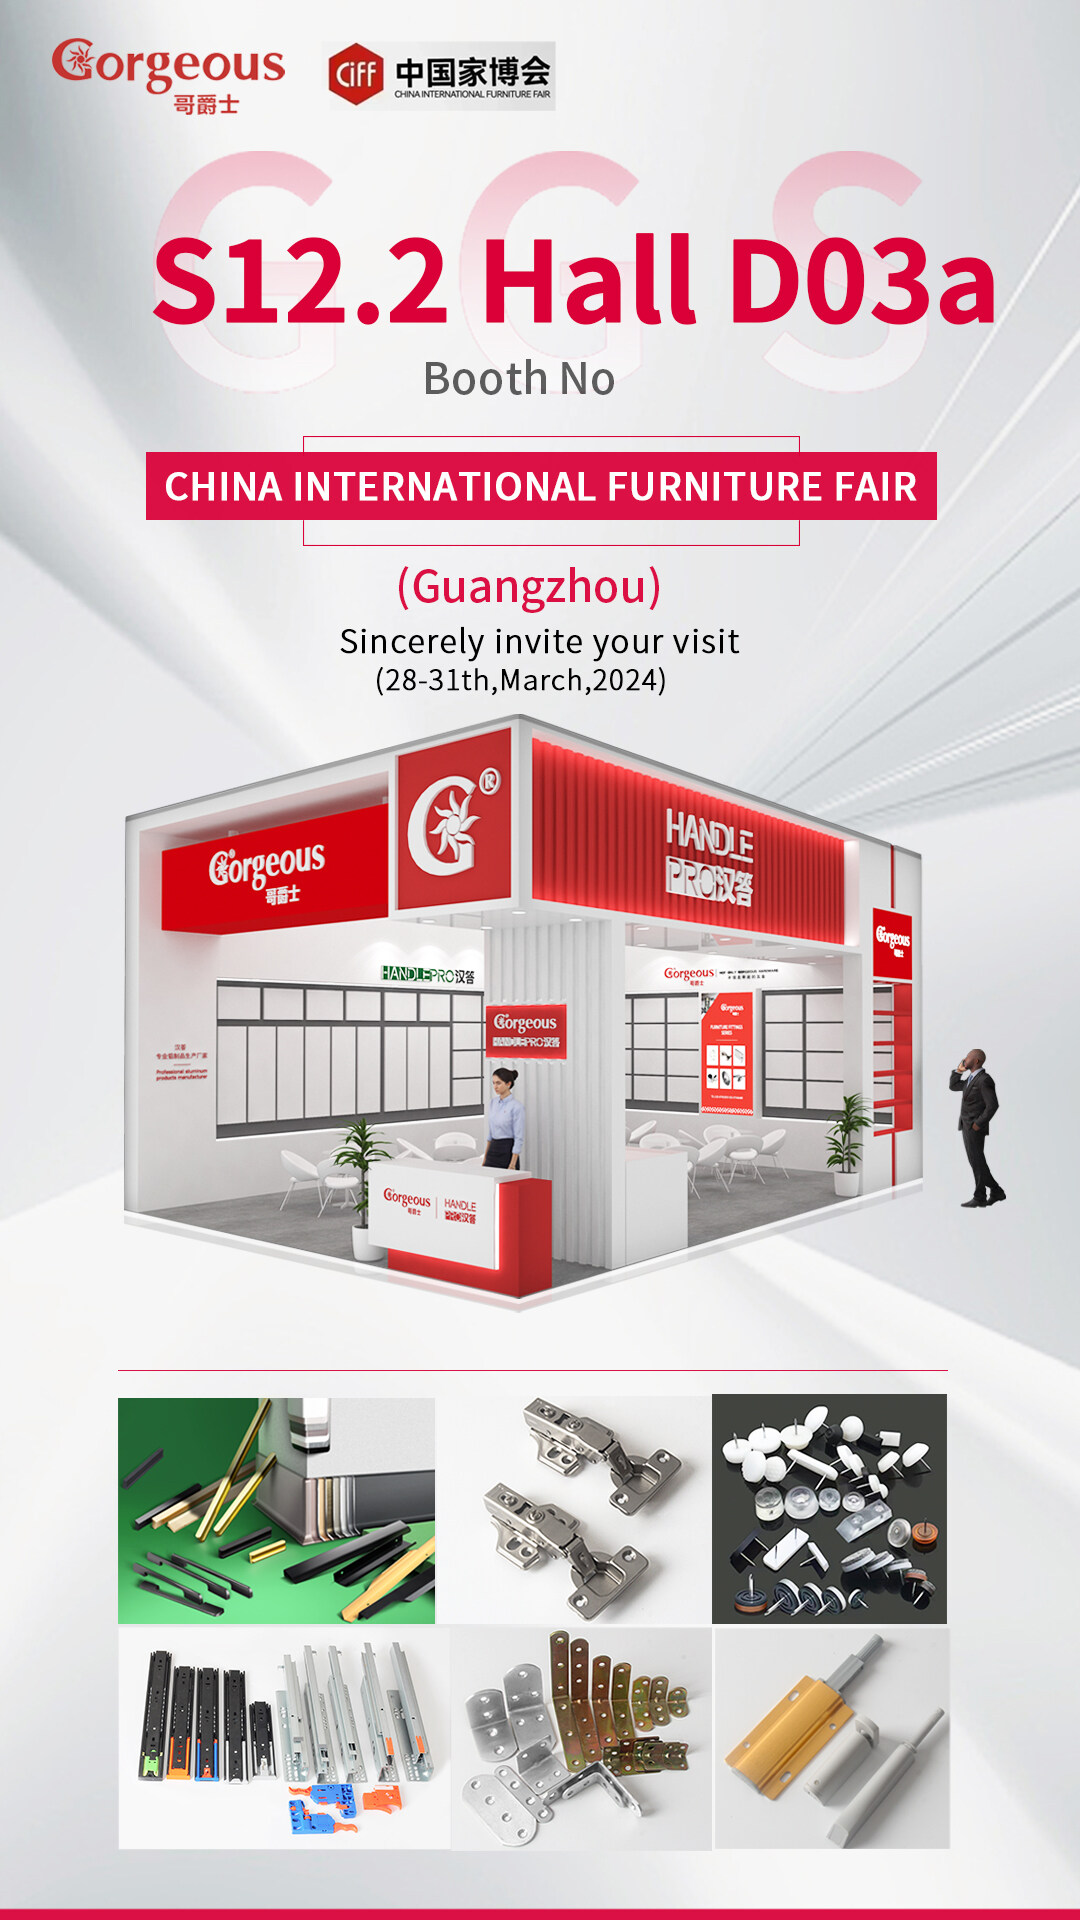 Our company will be participating in the CIFF & Interzum exhibition from March 28th to 31st at Hall S12.2D03a in Pazhou, Guangzhou. 